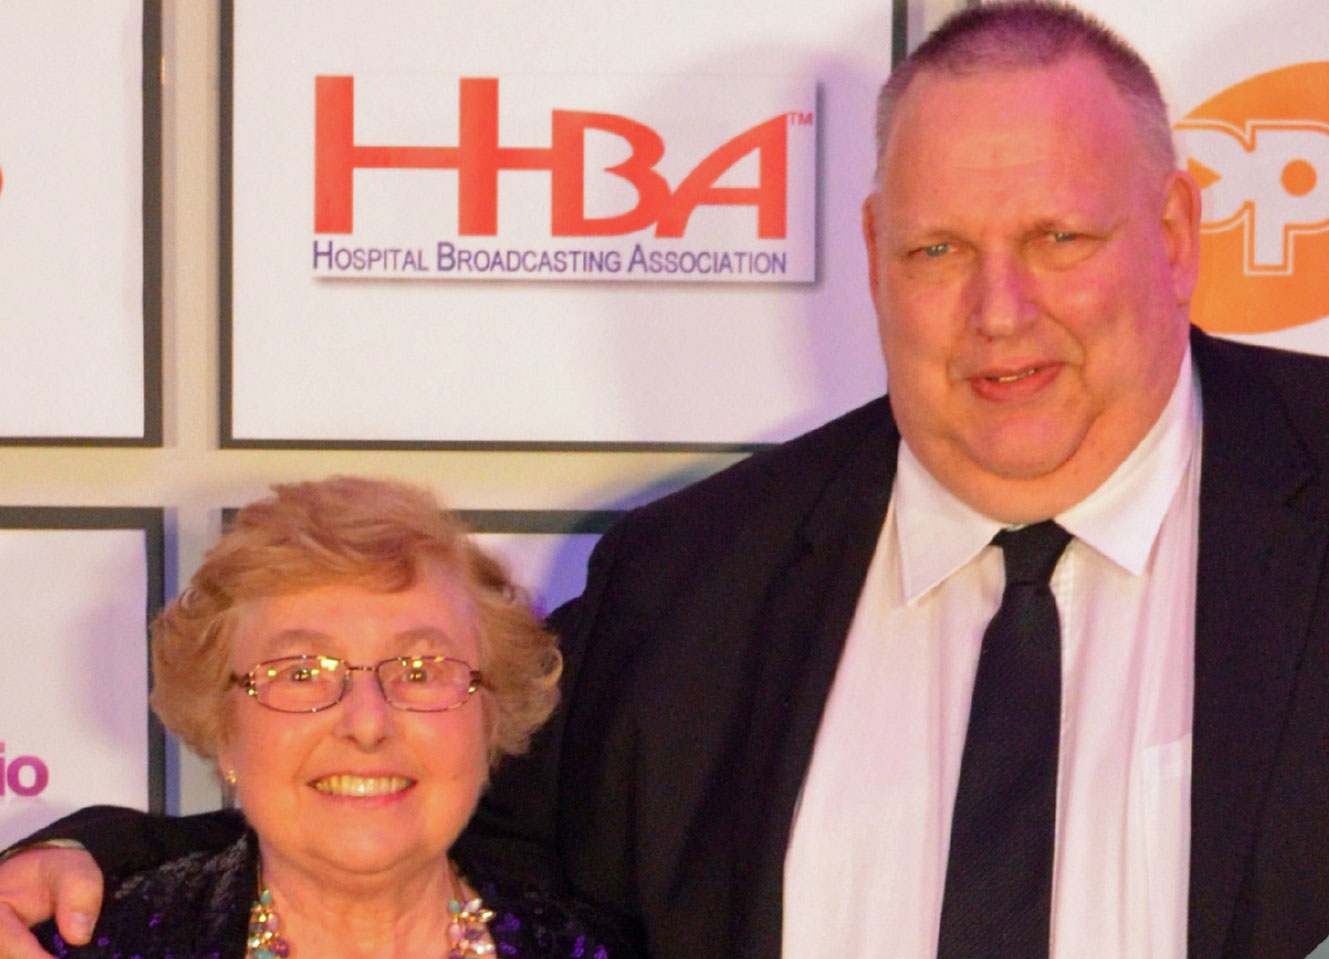 Bronze Winners. Pictured are Harrogate Hospital Radio presenters Ann Kilroy and Steve Pexton, who won bronze at this year’s National Hospital Radio Awards